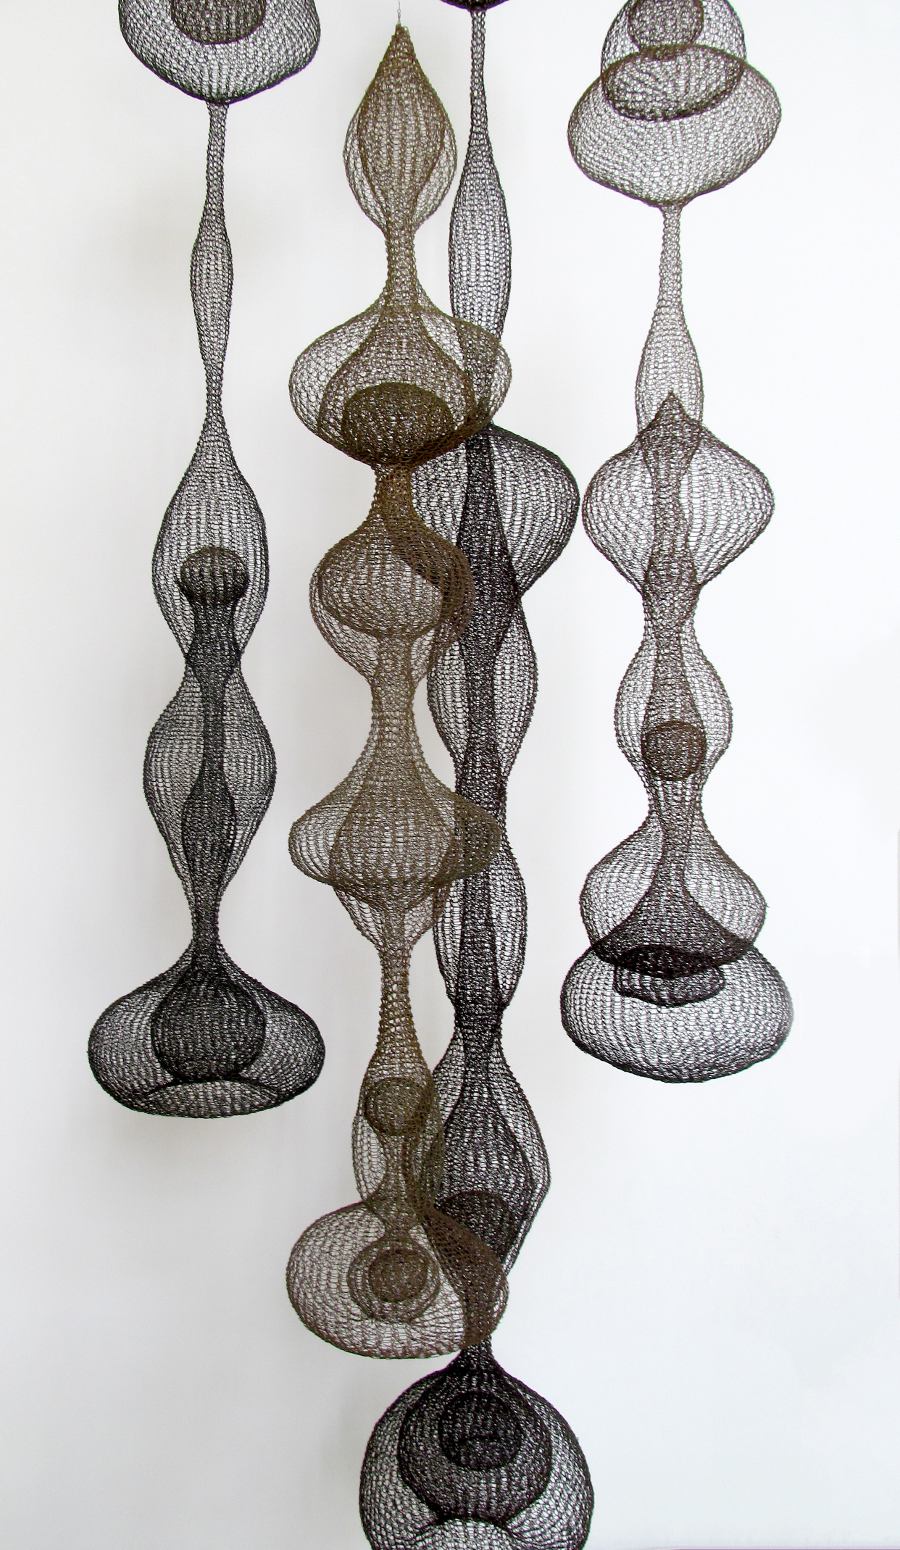 Title: Ruth Asawa | Group of Architectural Works, 1955-1965. Copper and brass wire (1926-2013) San Jose Museum of Art | Author: rocor | Source: Flickr | License: CC BY-NC 2.0